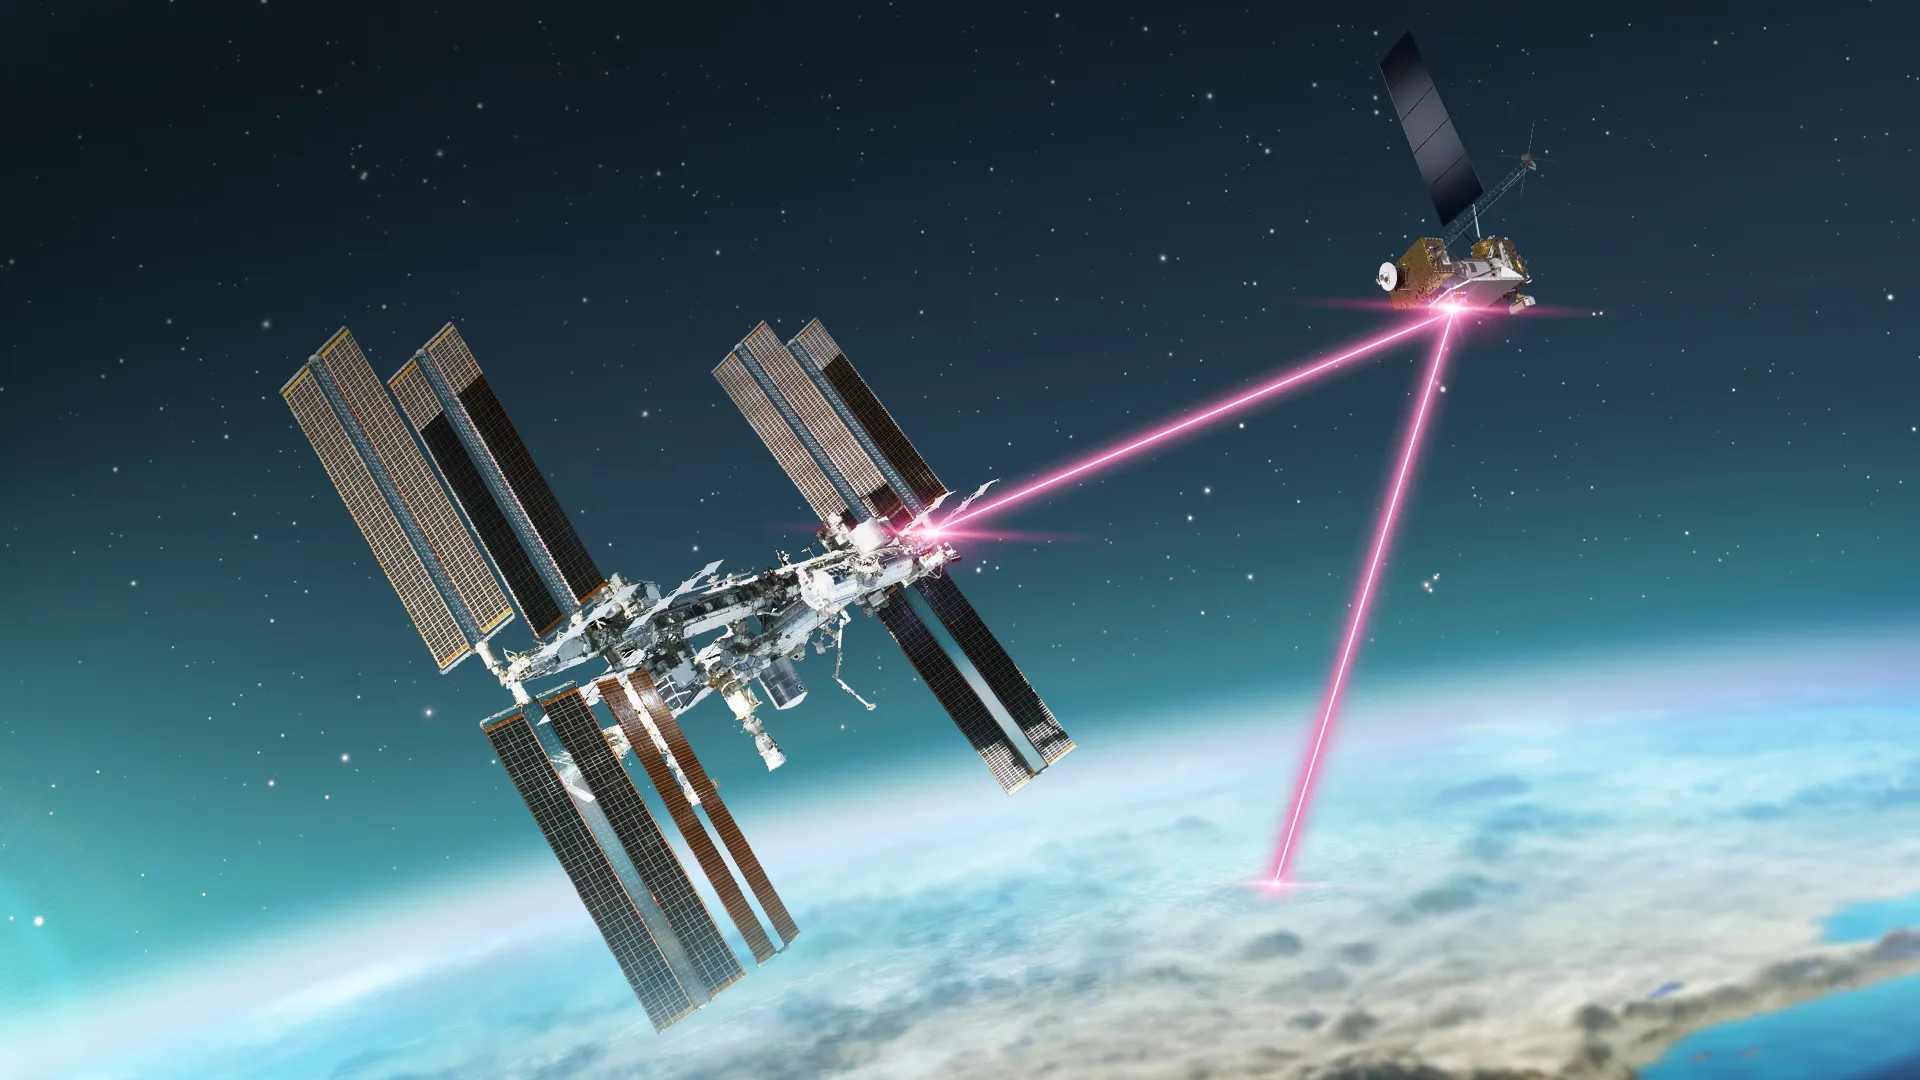 Groundbreaking laser communications experiment flying to ISS on SpaceX cargo mission next month Space